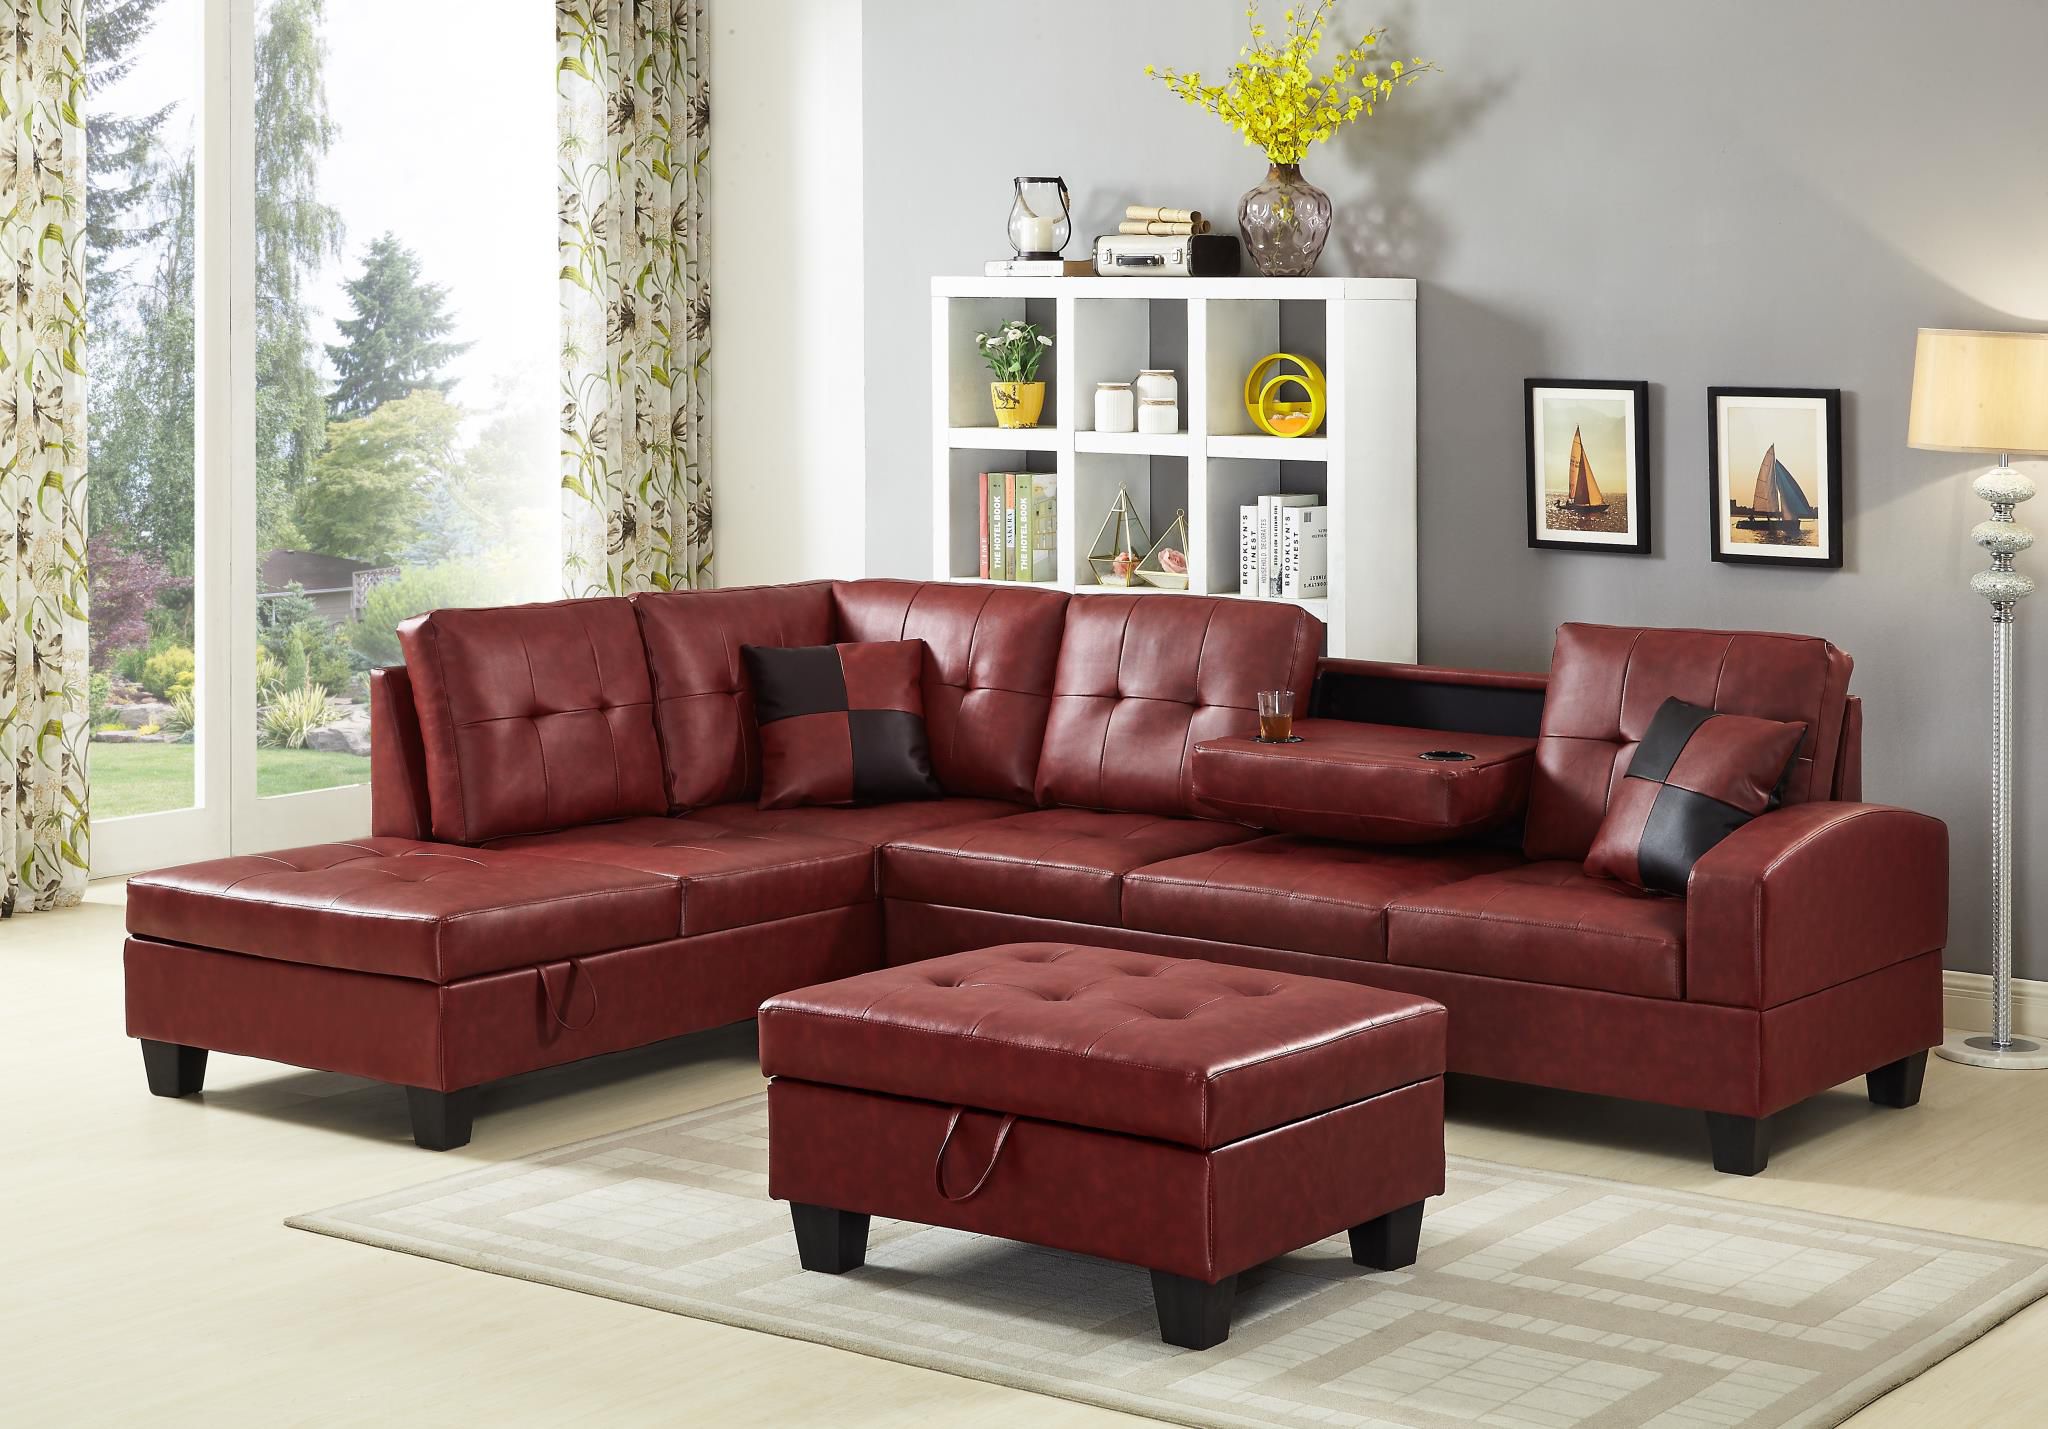 🔥 Special Sales 🔥 SECTIONAL & SOFA Come With Free OTTOMAN And All Come In Box 📦 - Free Delivery 🚚 To Reasonable Distance